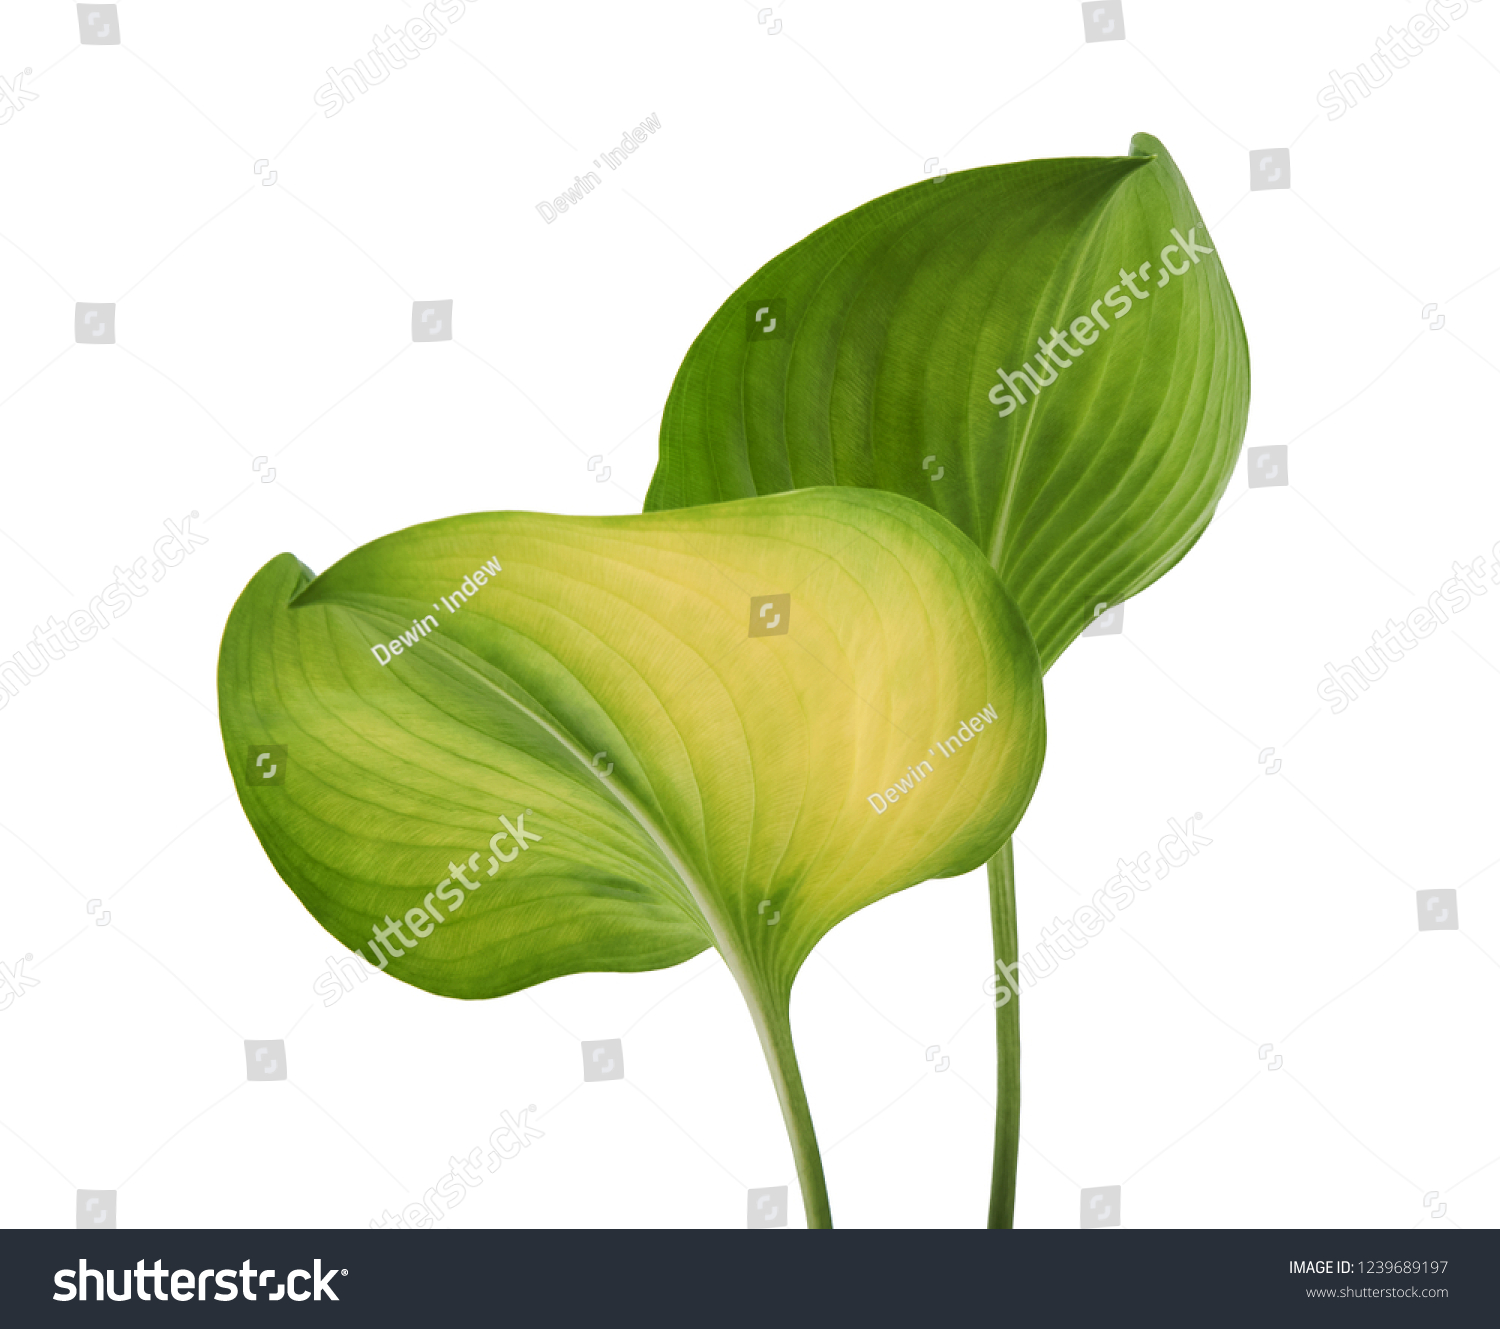 Cardwell lily leaf, Green circular leaves isolated on white background, with clipping path                                               #1239689197